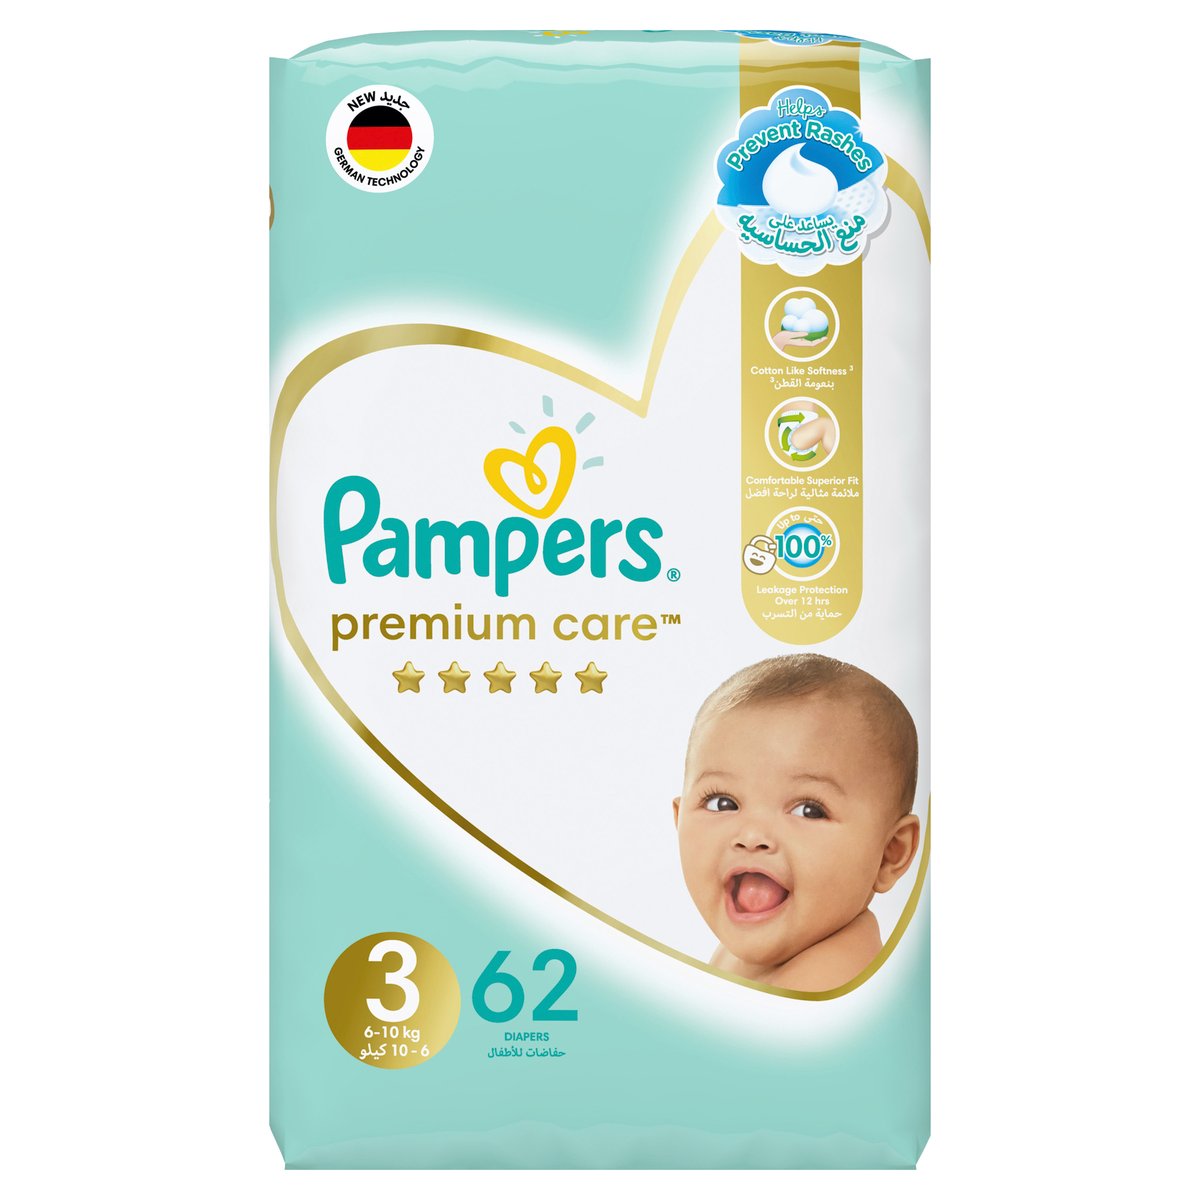 Pampers Premium Protection New Baby Sensitive 3-6kg Taille 2 x27